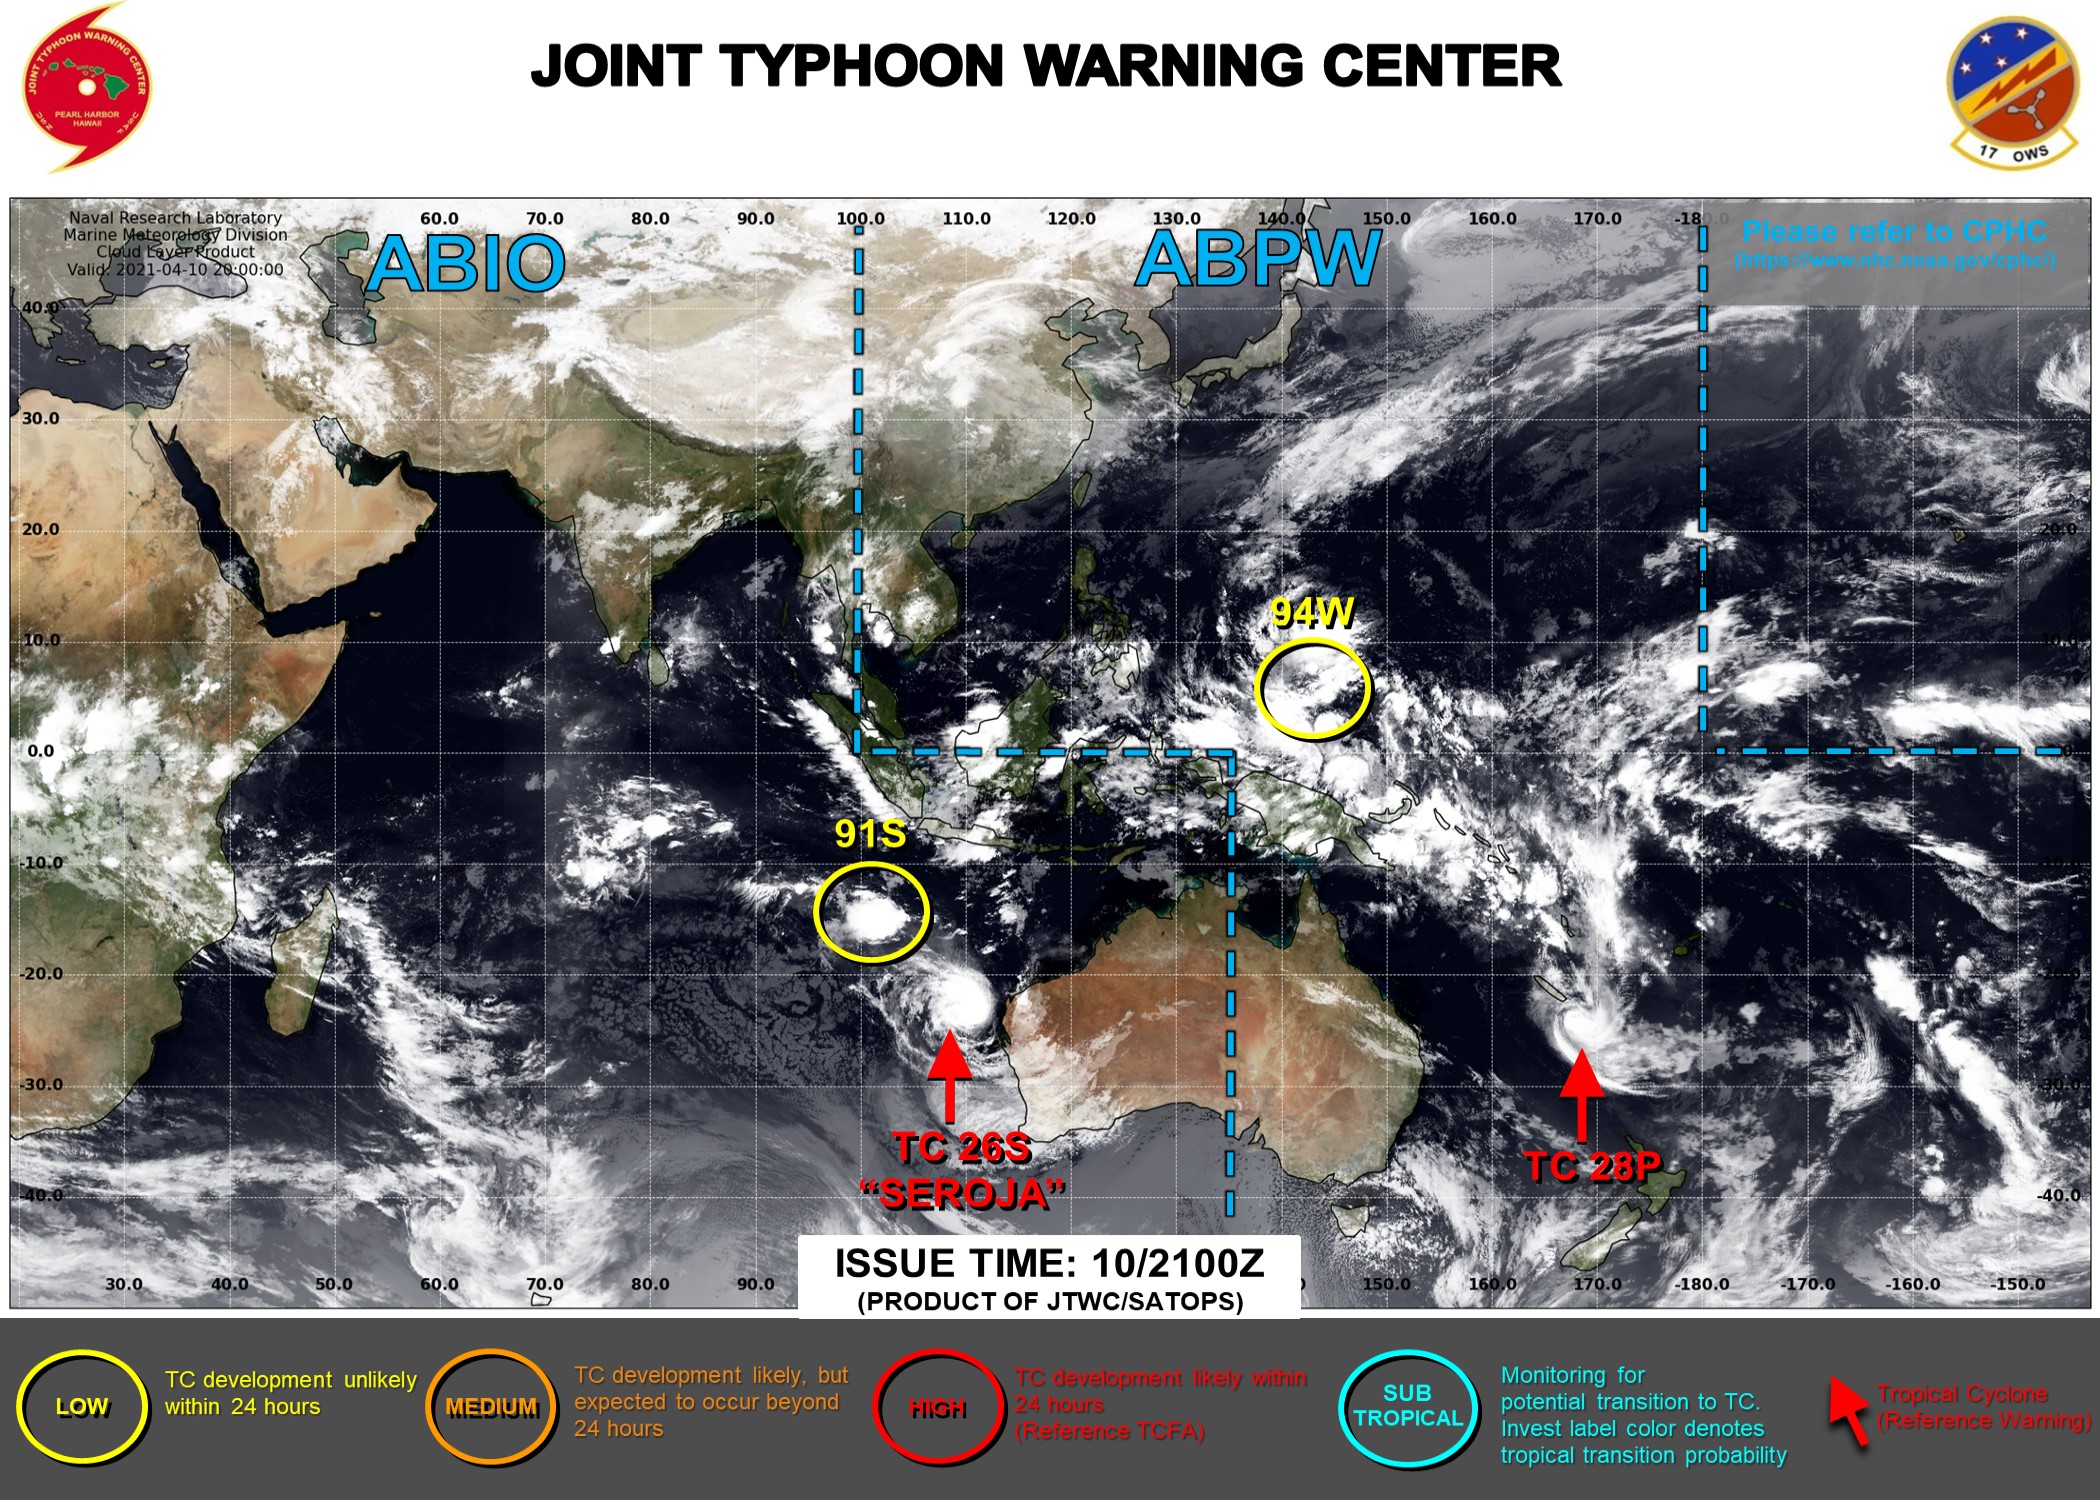 11/03UTC. THE JTWC IS ISSUING 6HOURLY WARNINGS ON TC 26S(SEROJA) AND TC 28P. 3HOURLY SATELLITE BULLETINS ARE ISSUED FOR 26S,28P AND 91S.